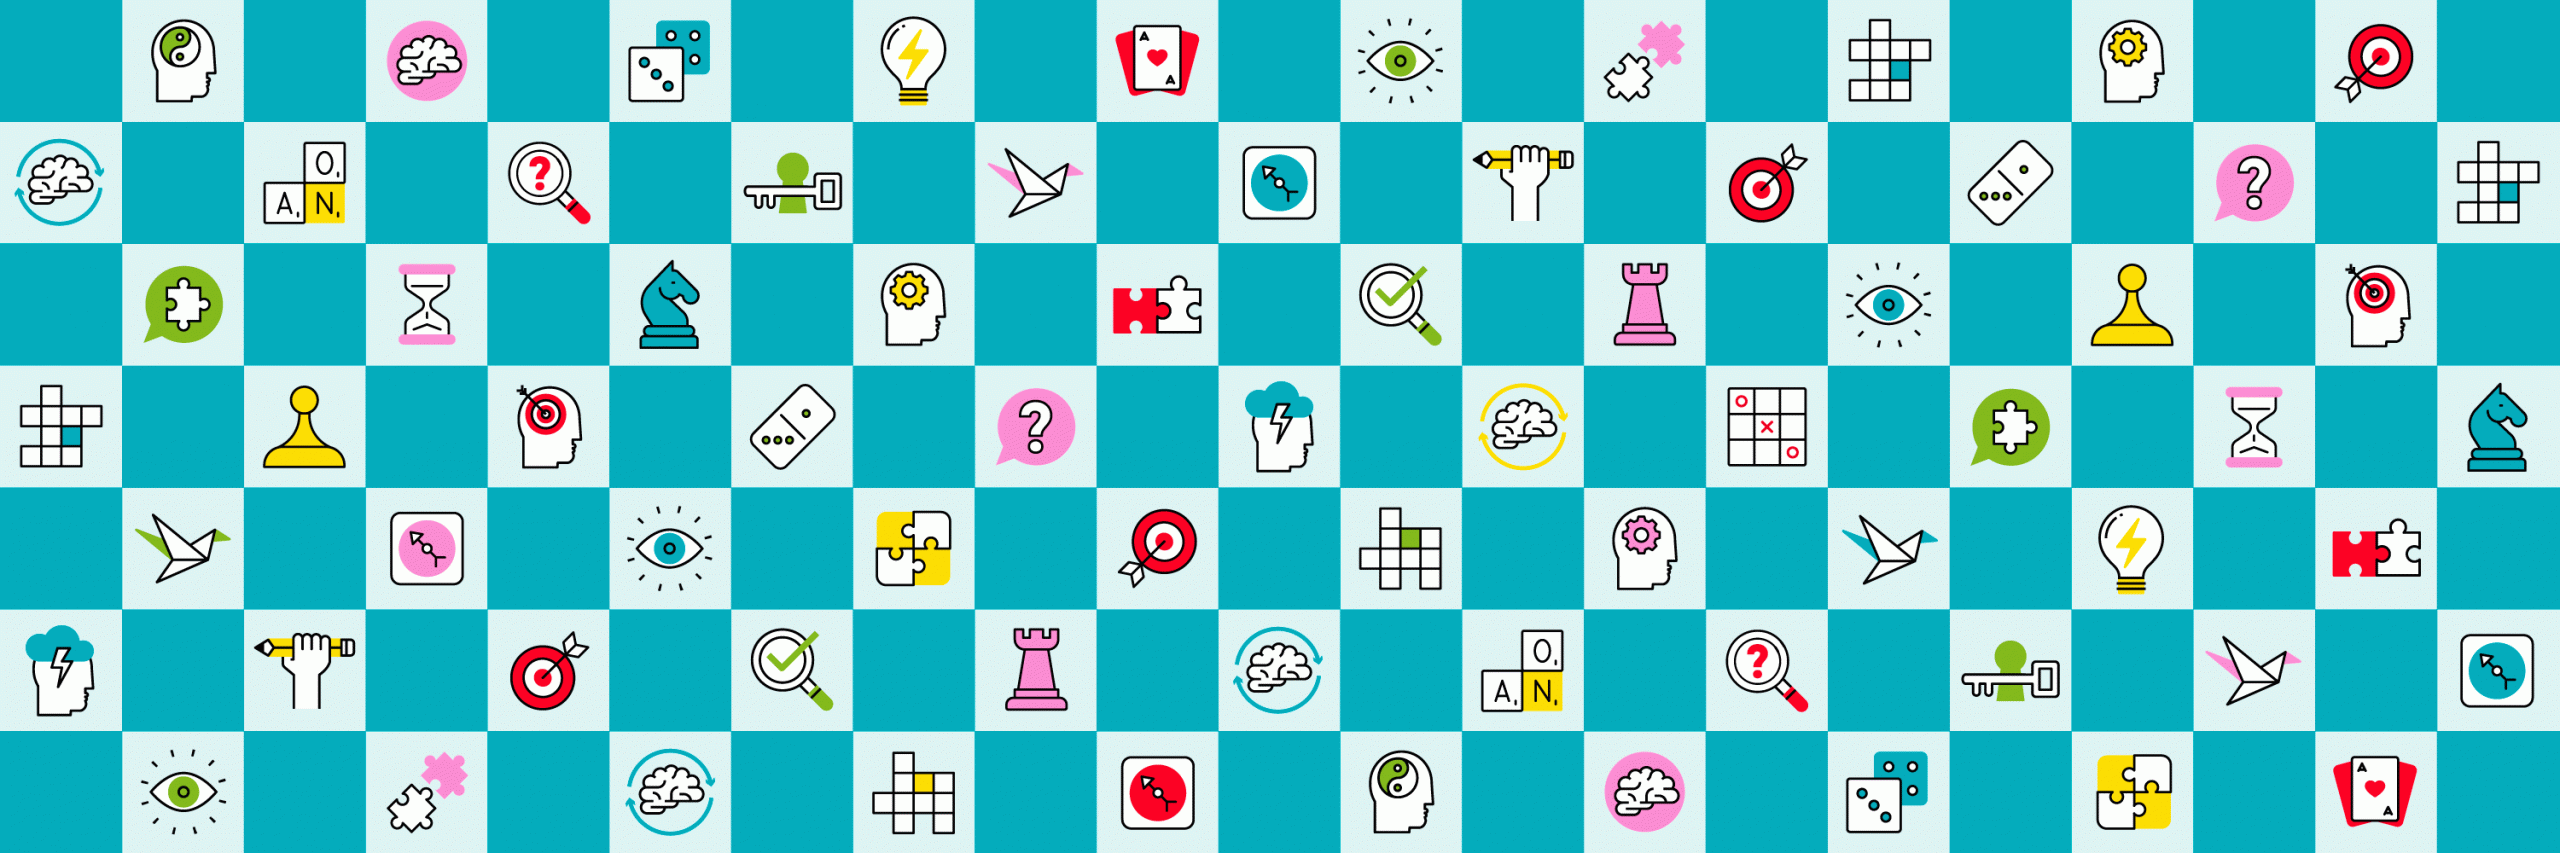 Spot it! Free Games, Activities, Puzzles